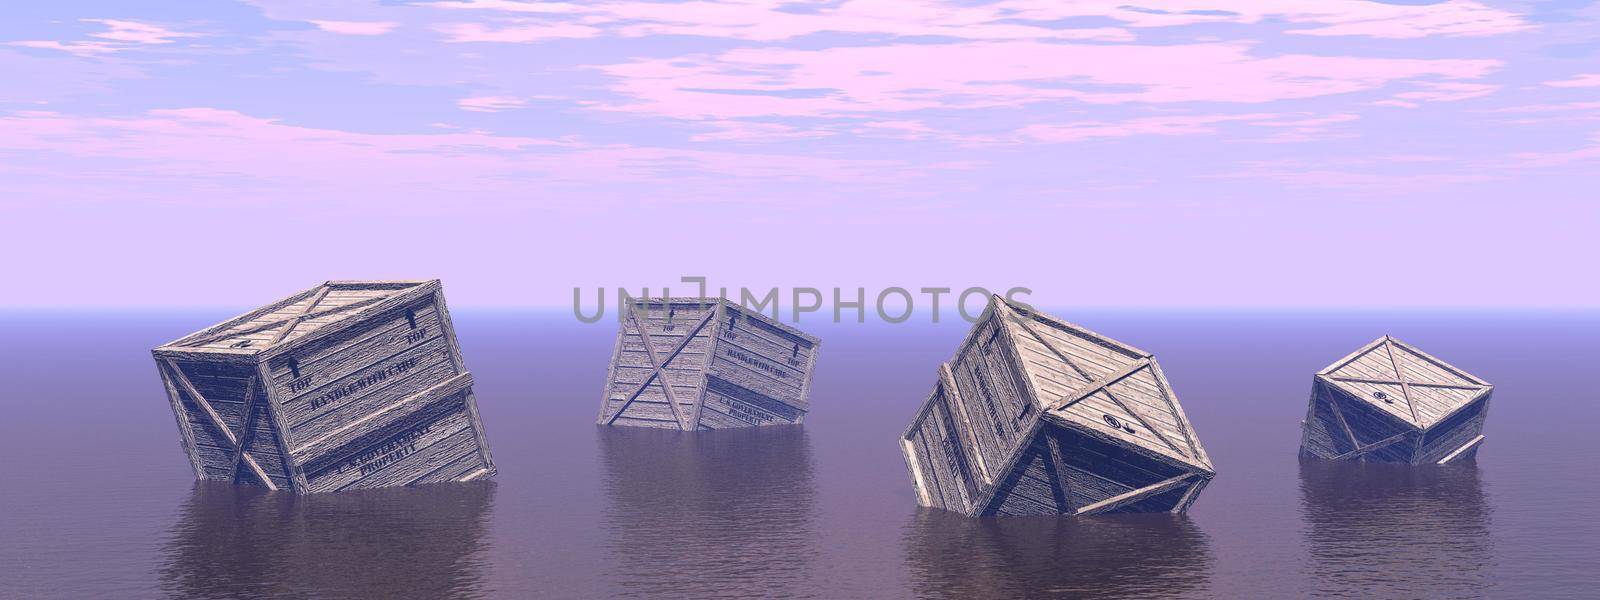 lost box in the middle of the sea - 3d rendering by mariephotos